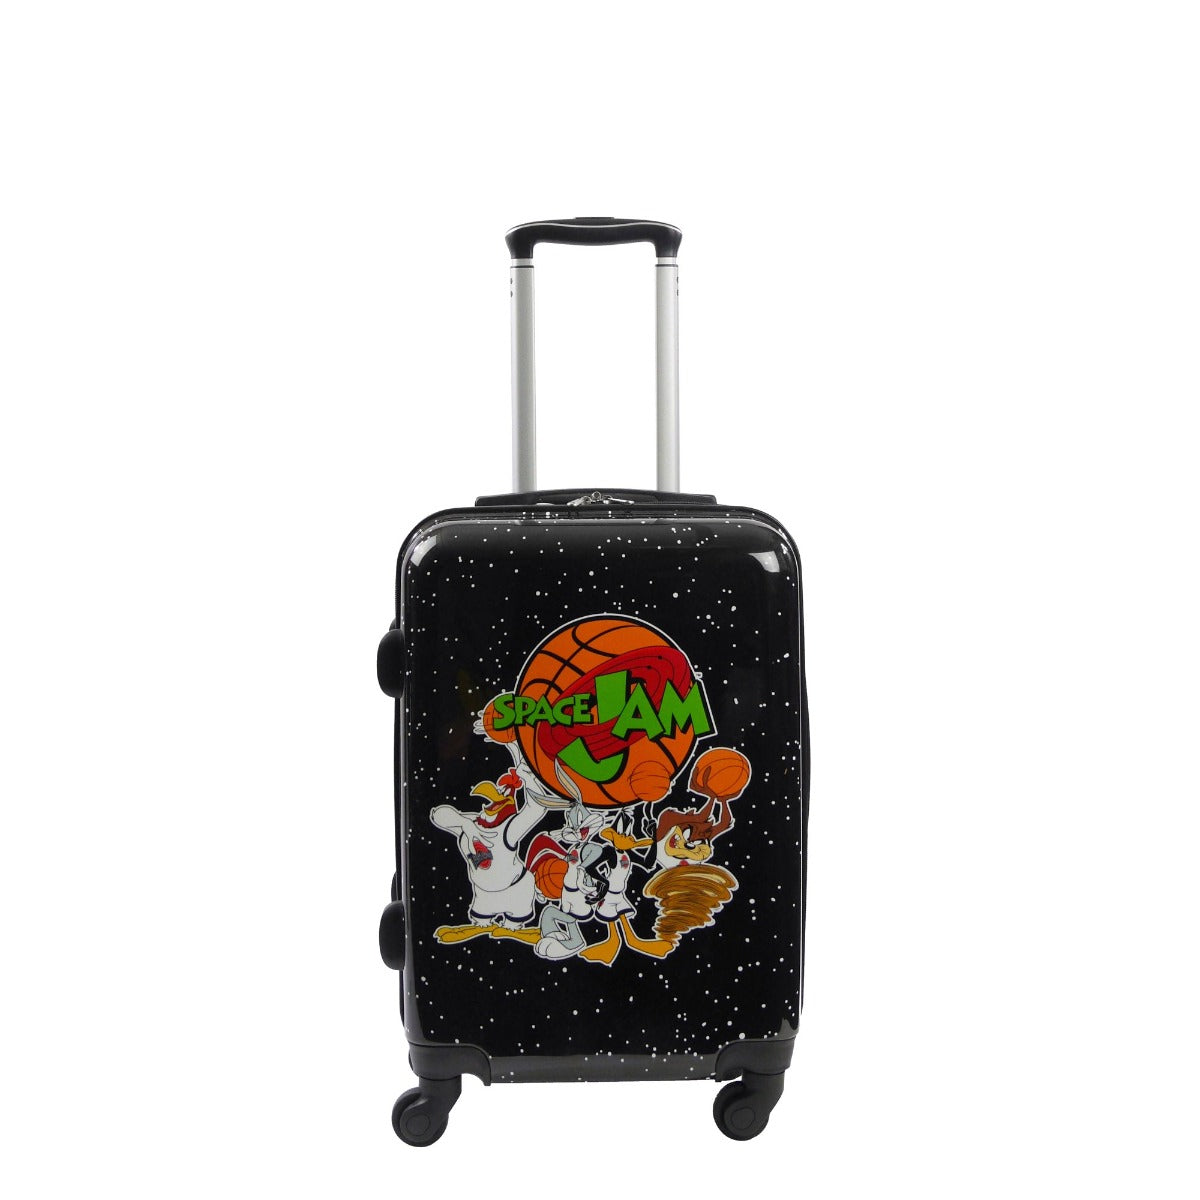 Ful Space Jam 21" hardside spinner suitcase - best carry on luggage for kids and adults